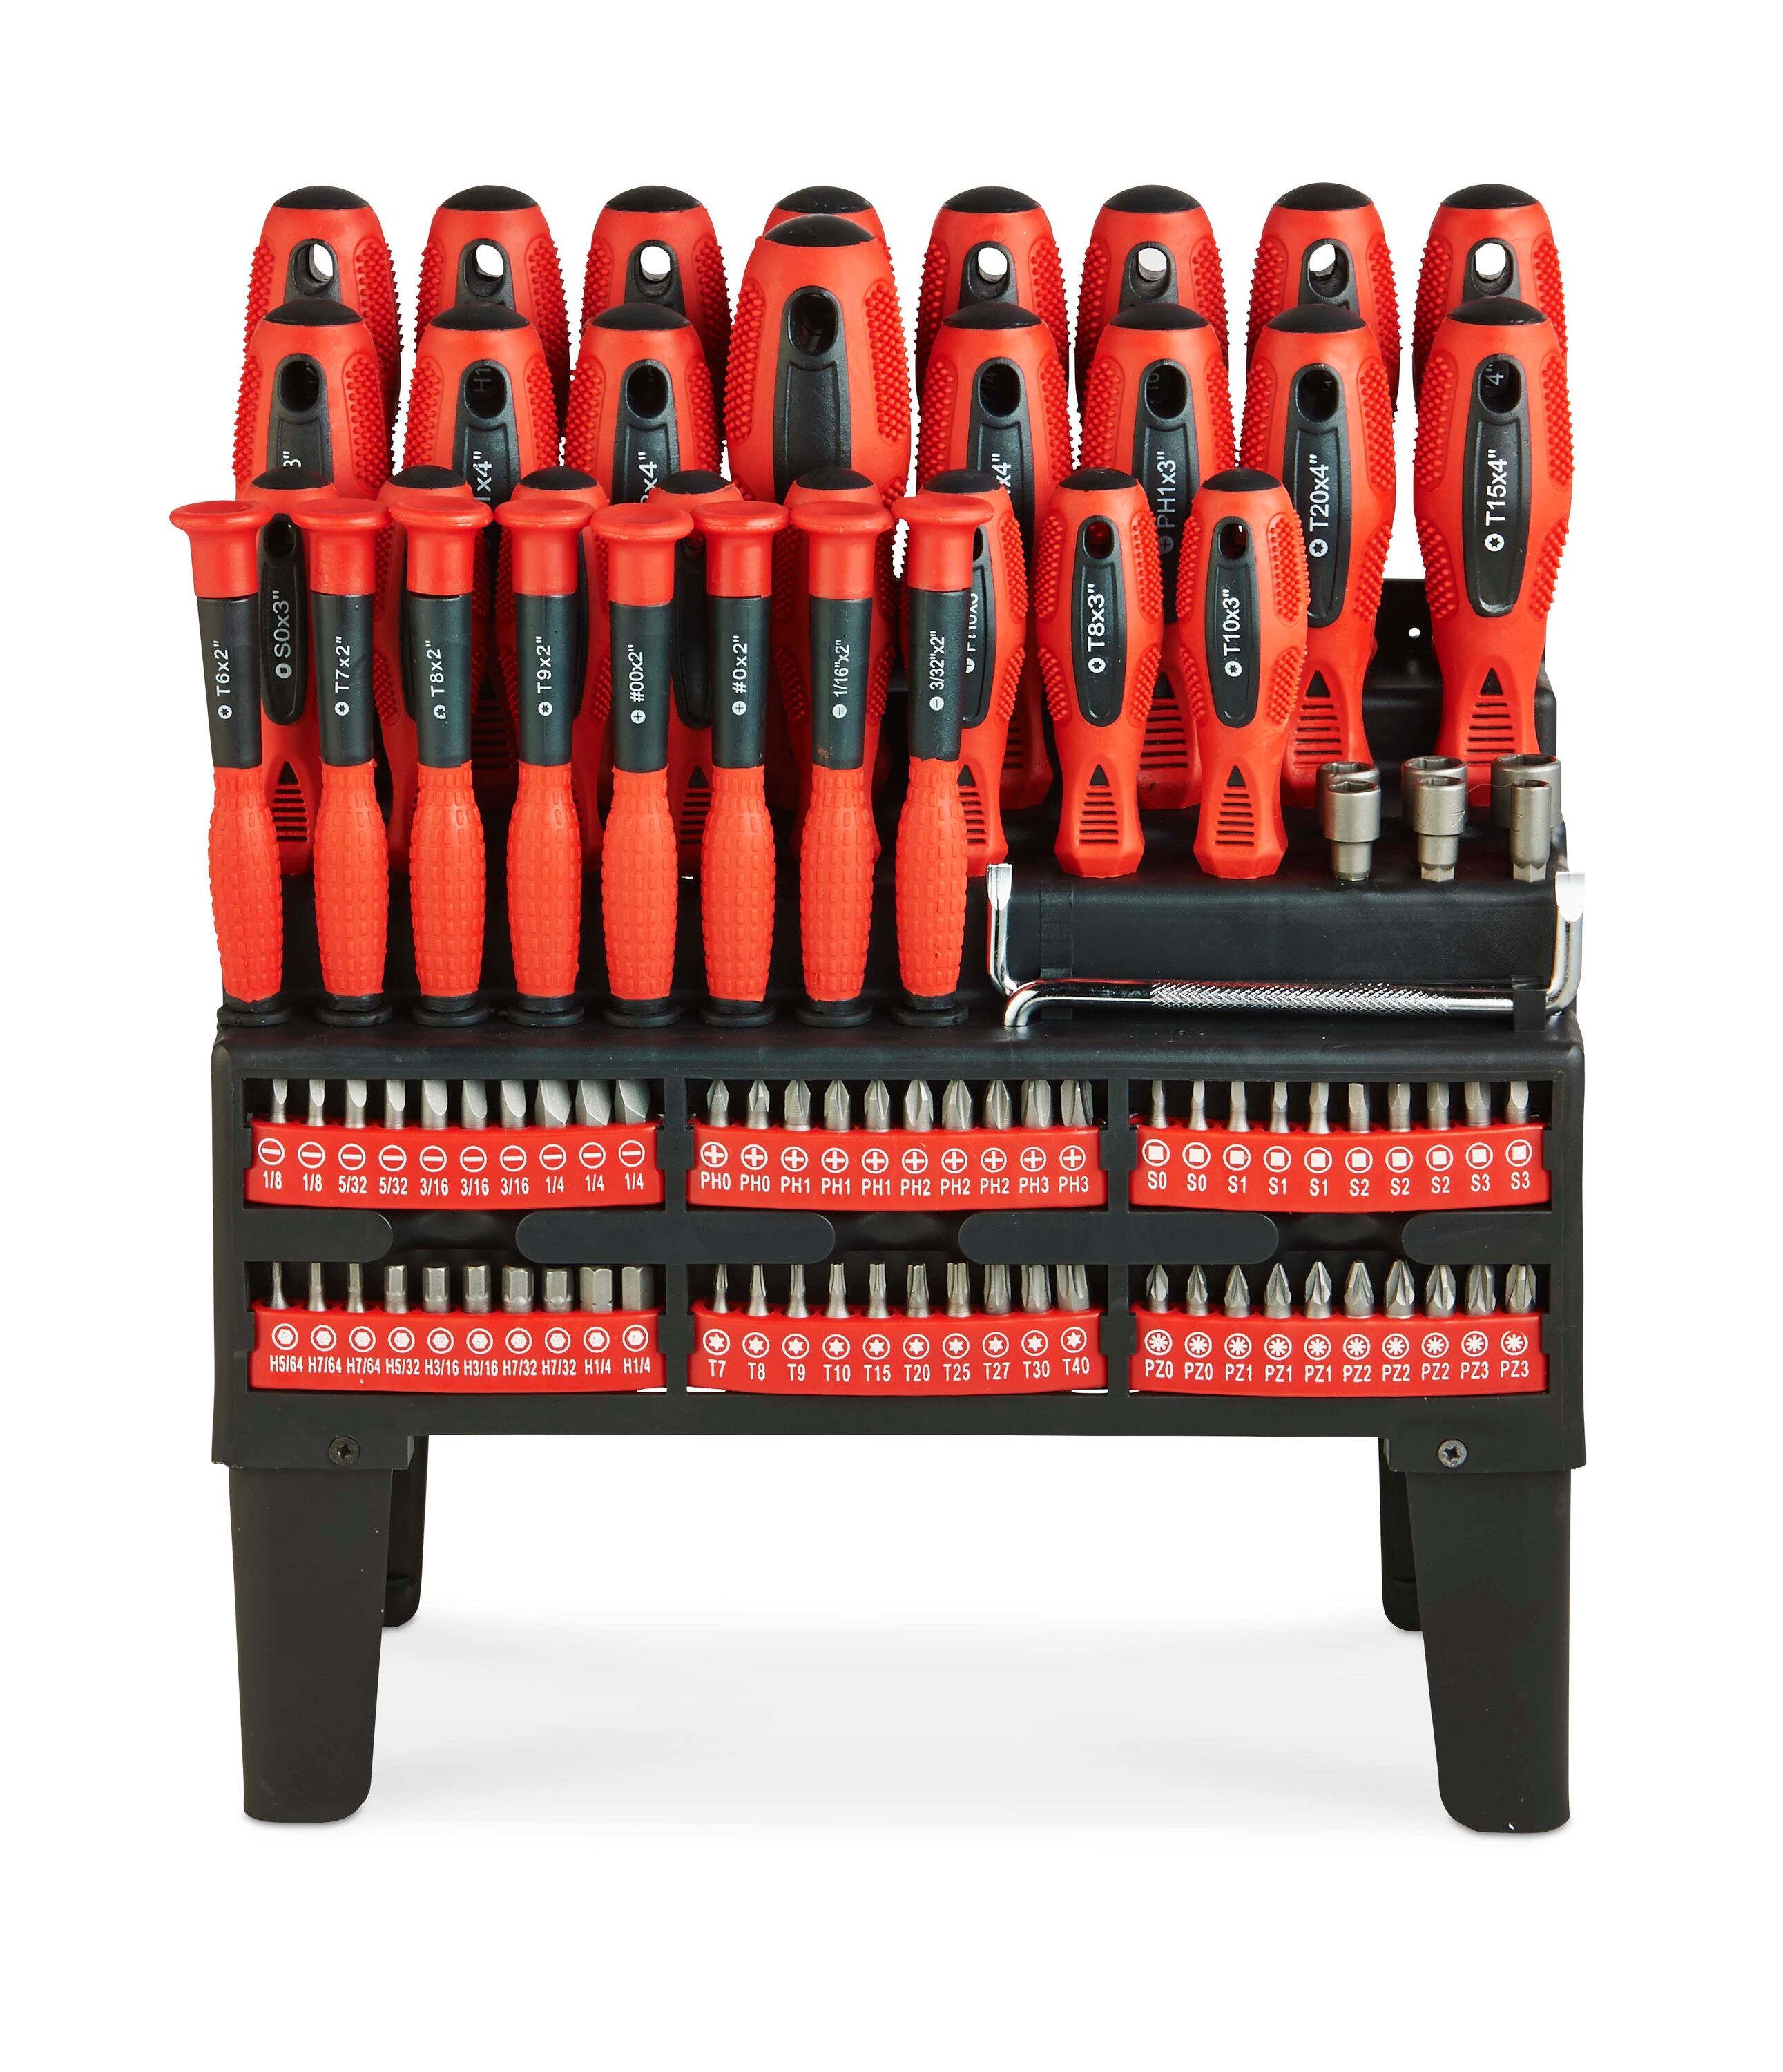 WorkPro 29 Piece Dual Driver Screwdriver features an slip-resistant rubber grip